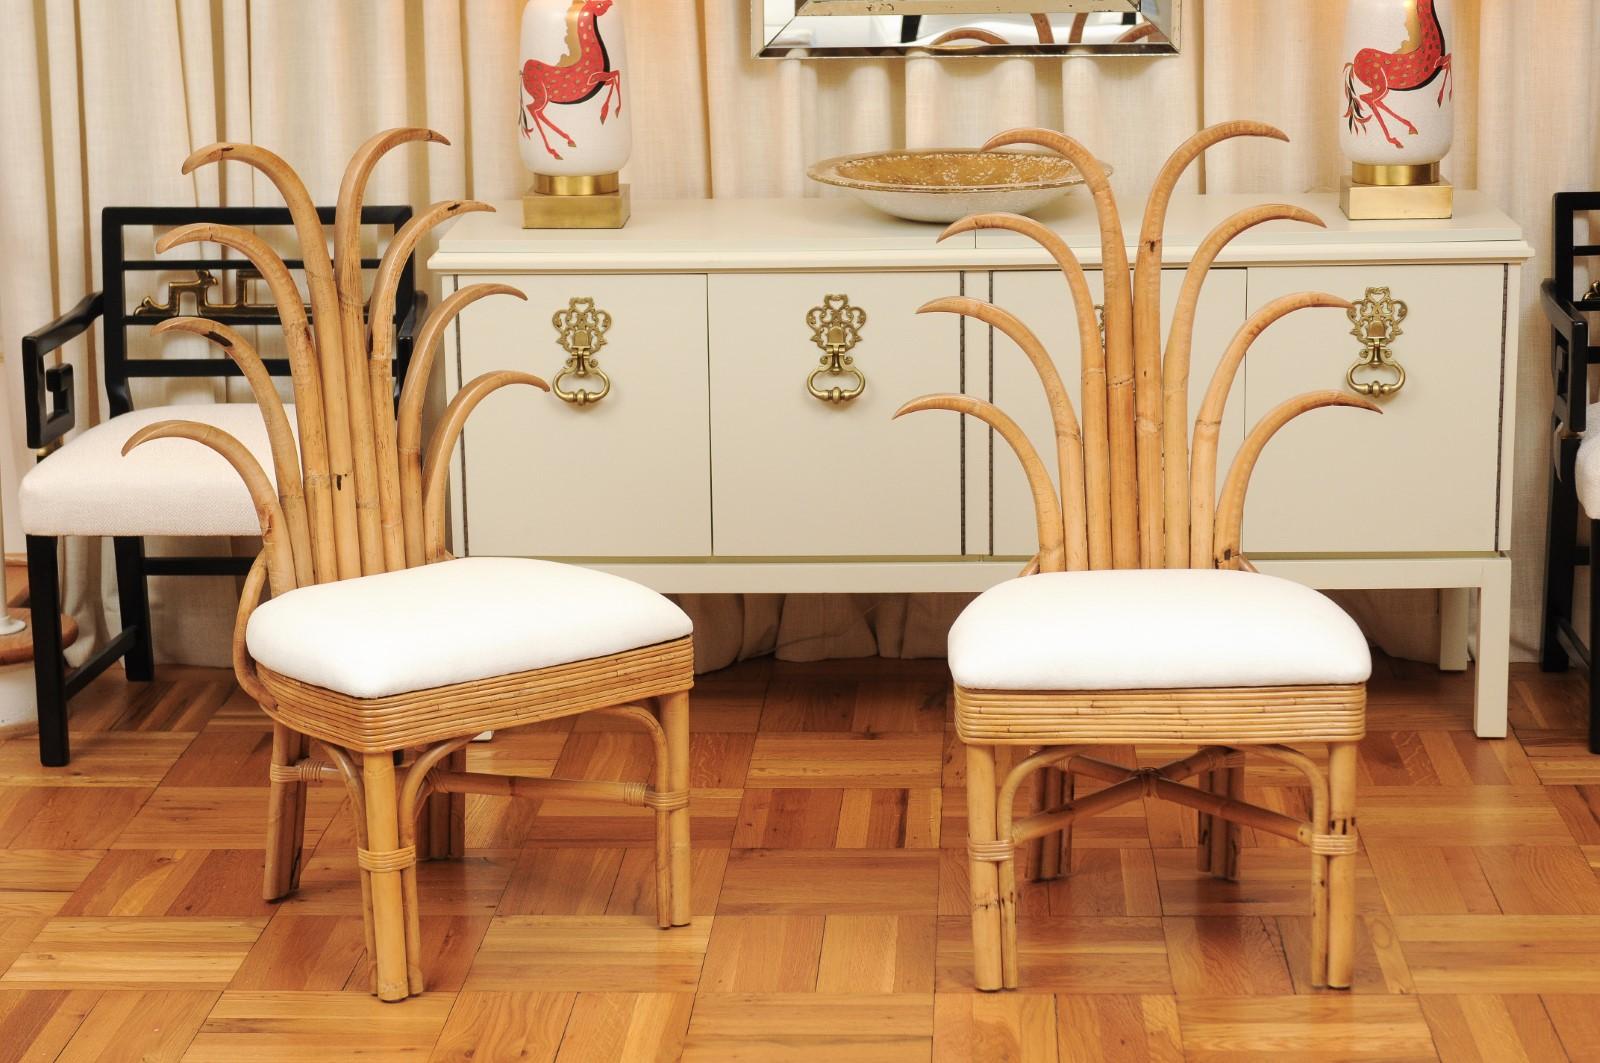 This magnificent set of dining chairs is shipped as professionally photographed and described in the listing: meticulously restored and completely installation ready. This incredible set is unique on the World market.

An absolutely majestic set of